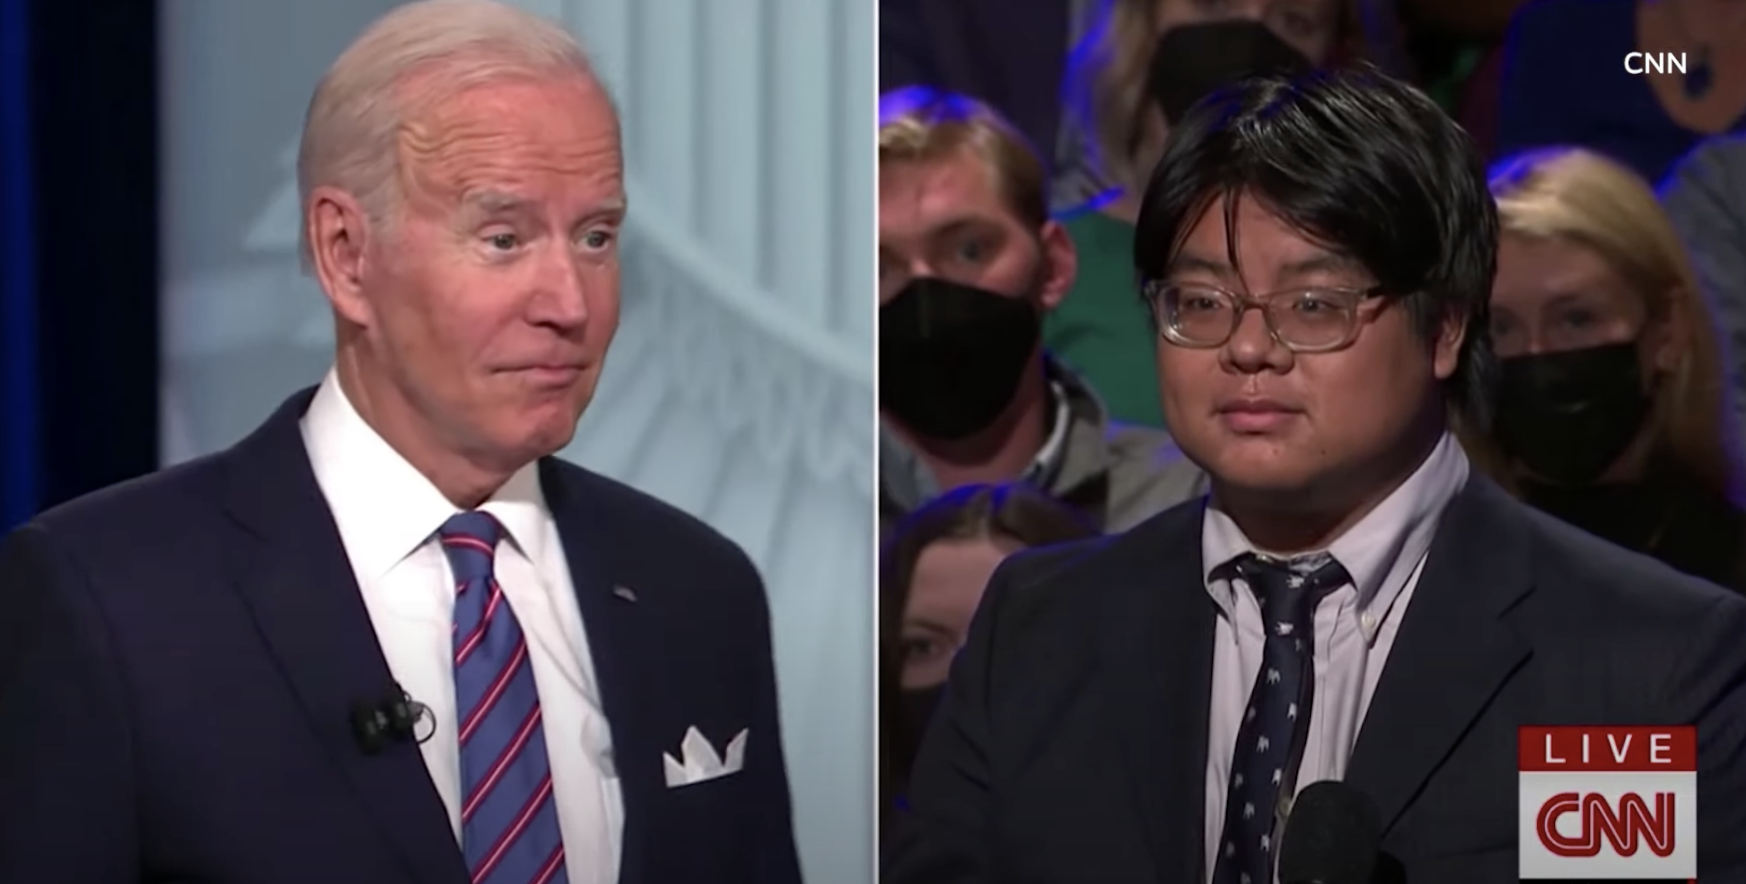 Video: Johns Hopkins student asks President Biden about climate change - The Hub at Johns Hopkins